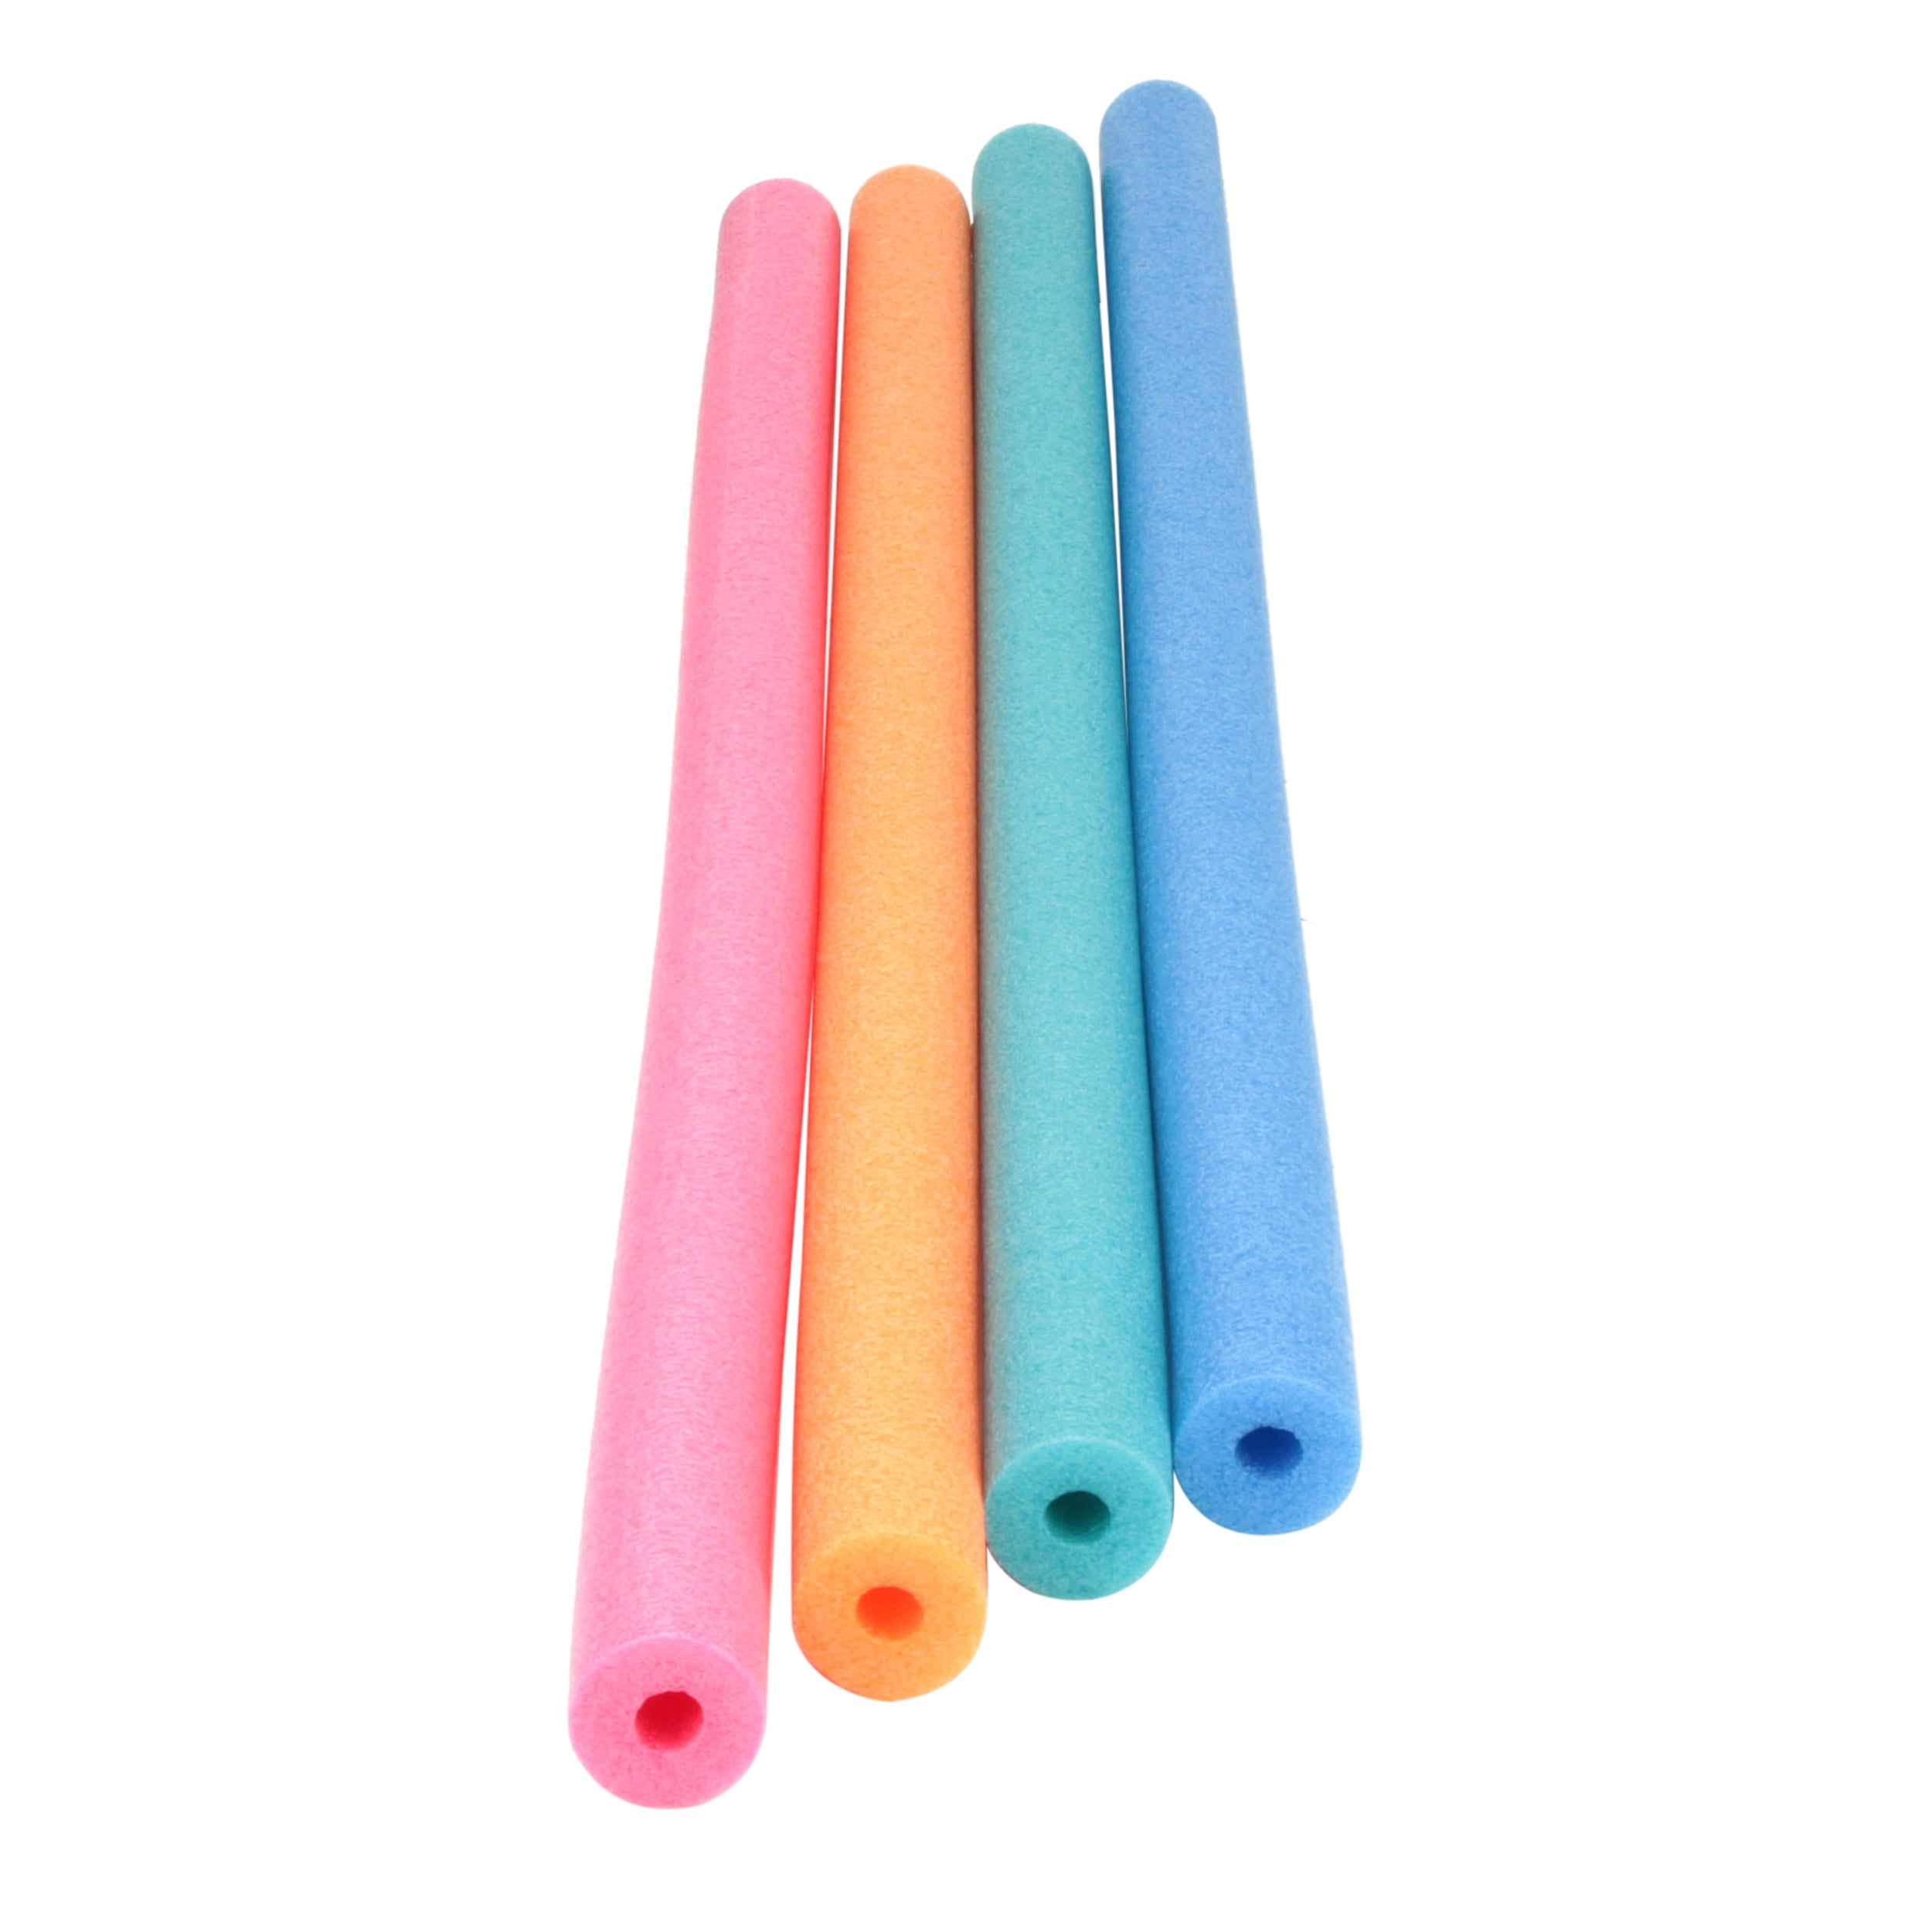 Robelle Swimming Pool Noodles 40-Pack Colors May Vary 